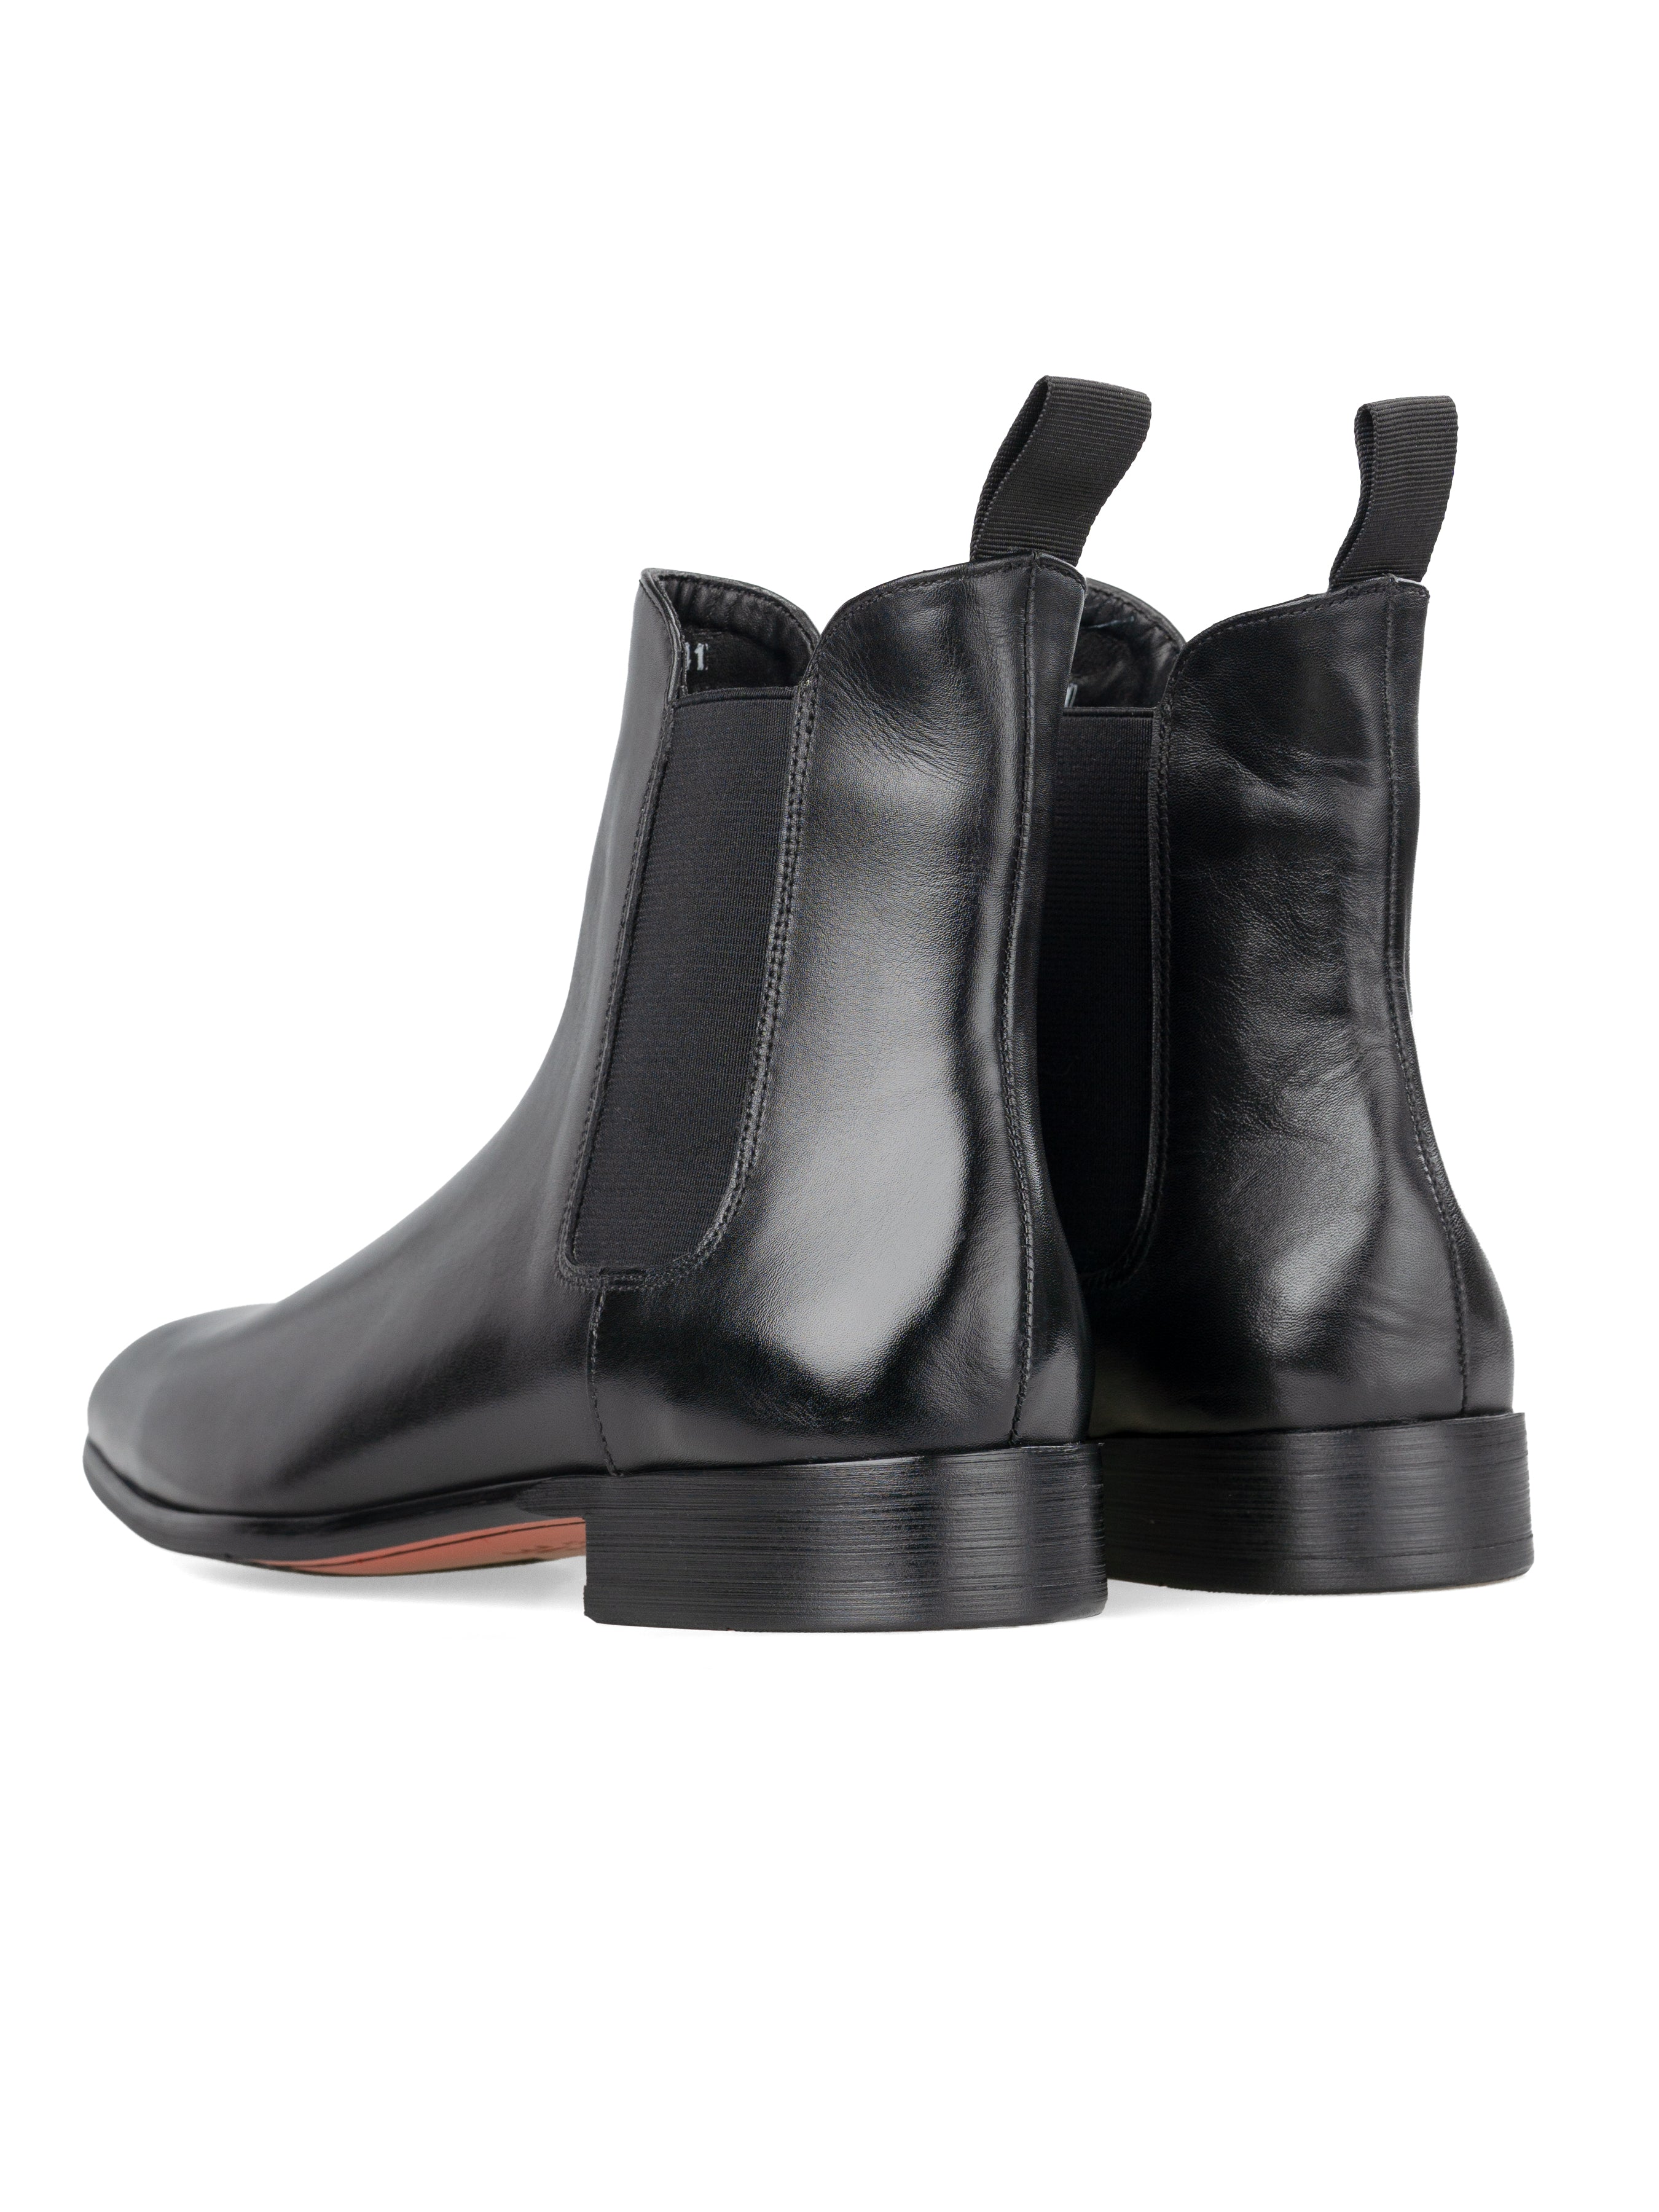 Louis Chelsea Boots - Solid Black Leather